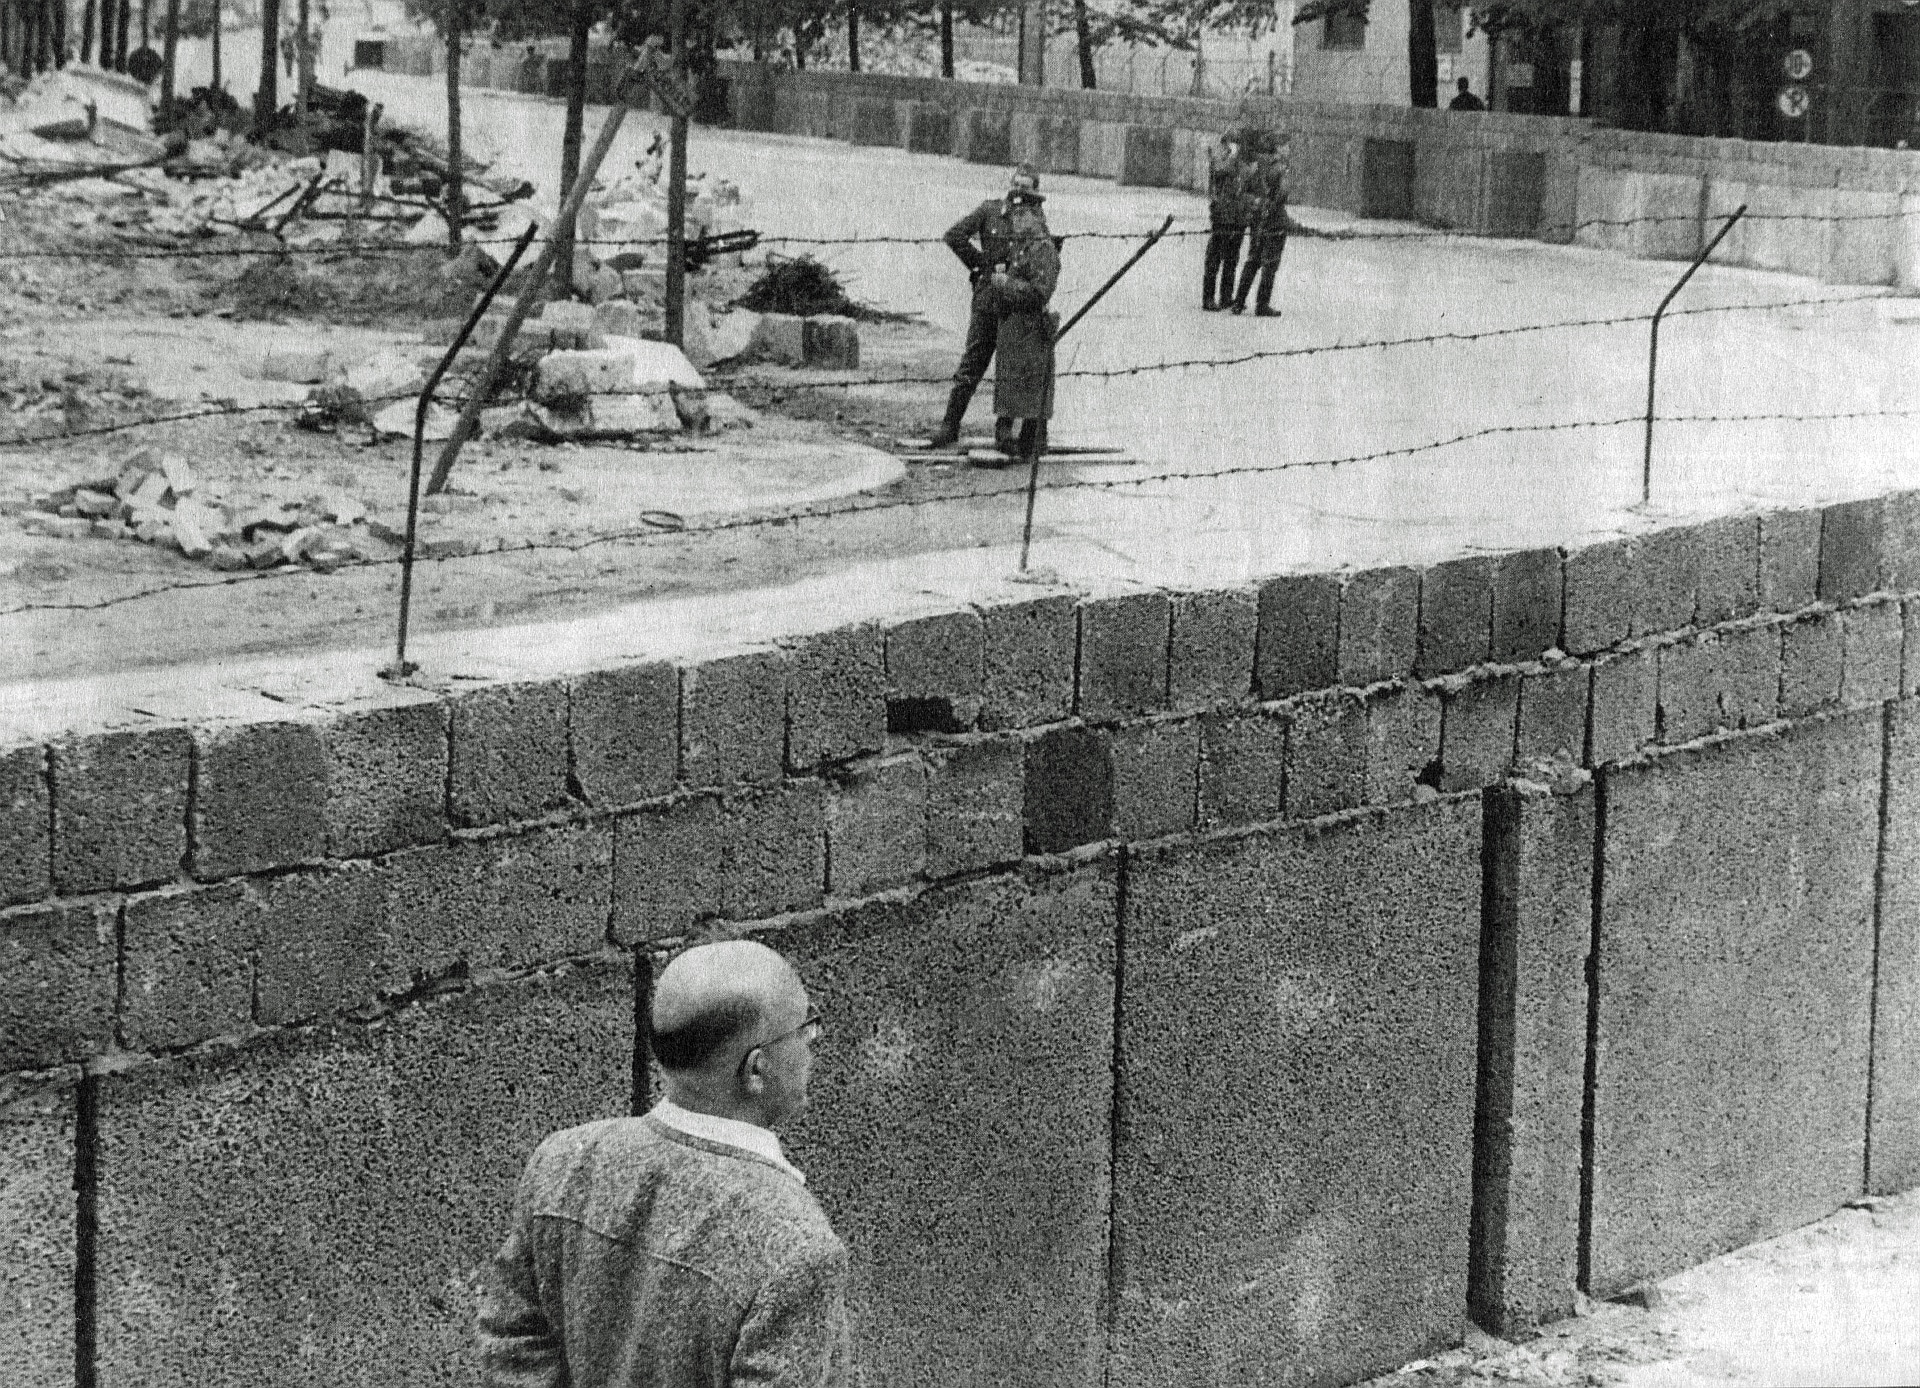 The Berlin wall in 1961. From: Vasabladet, 12 August 2011. Author: Unknown. Public domain.